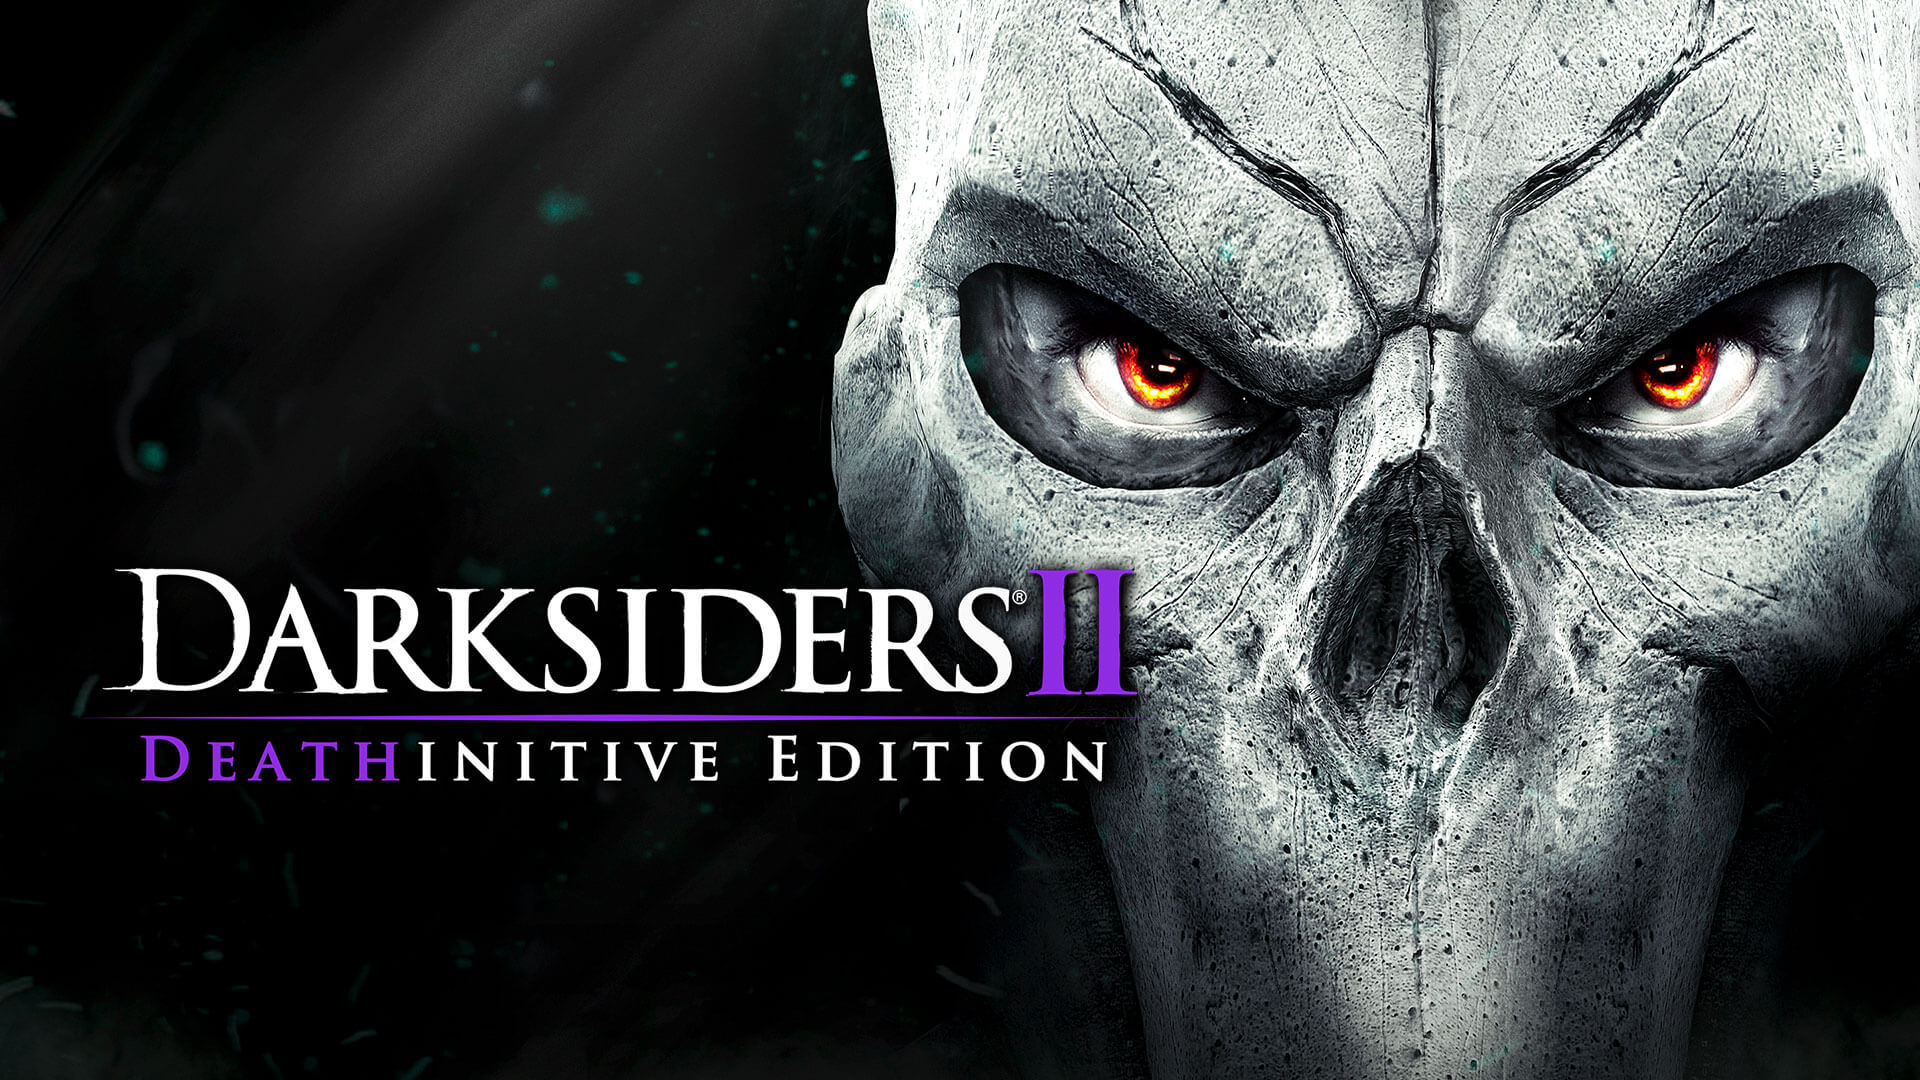 Darksiders 2 Deathinitive Edition (STEAM) СНГ